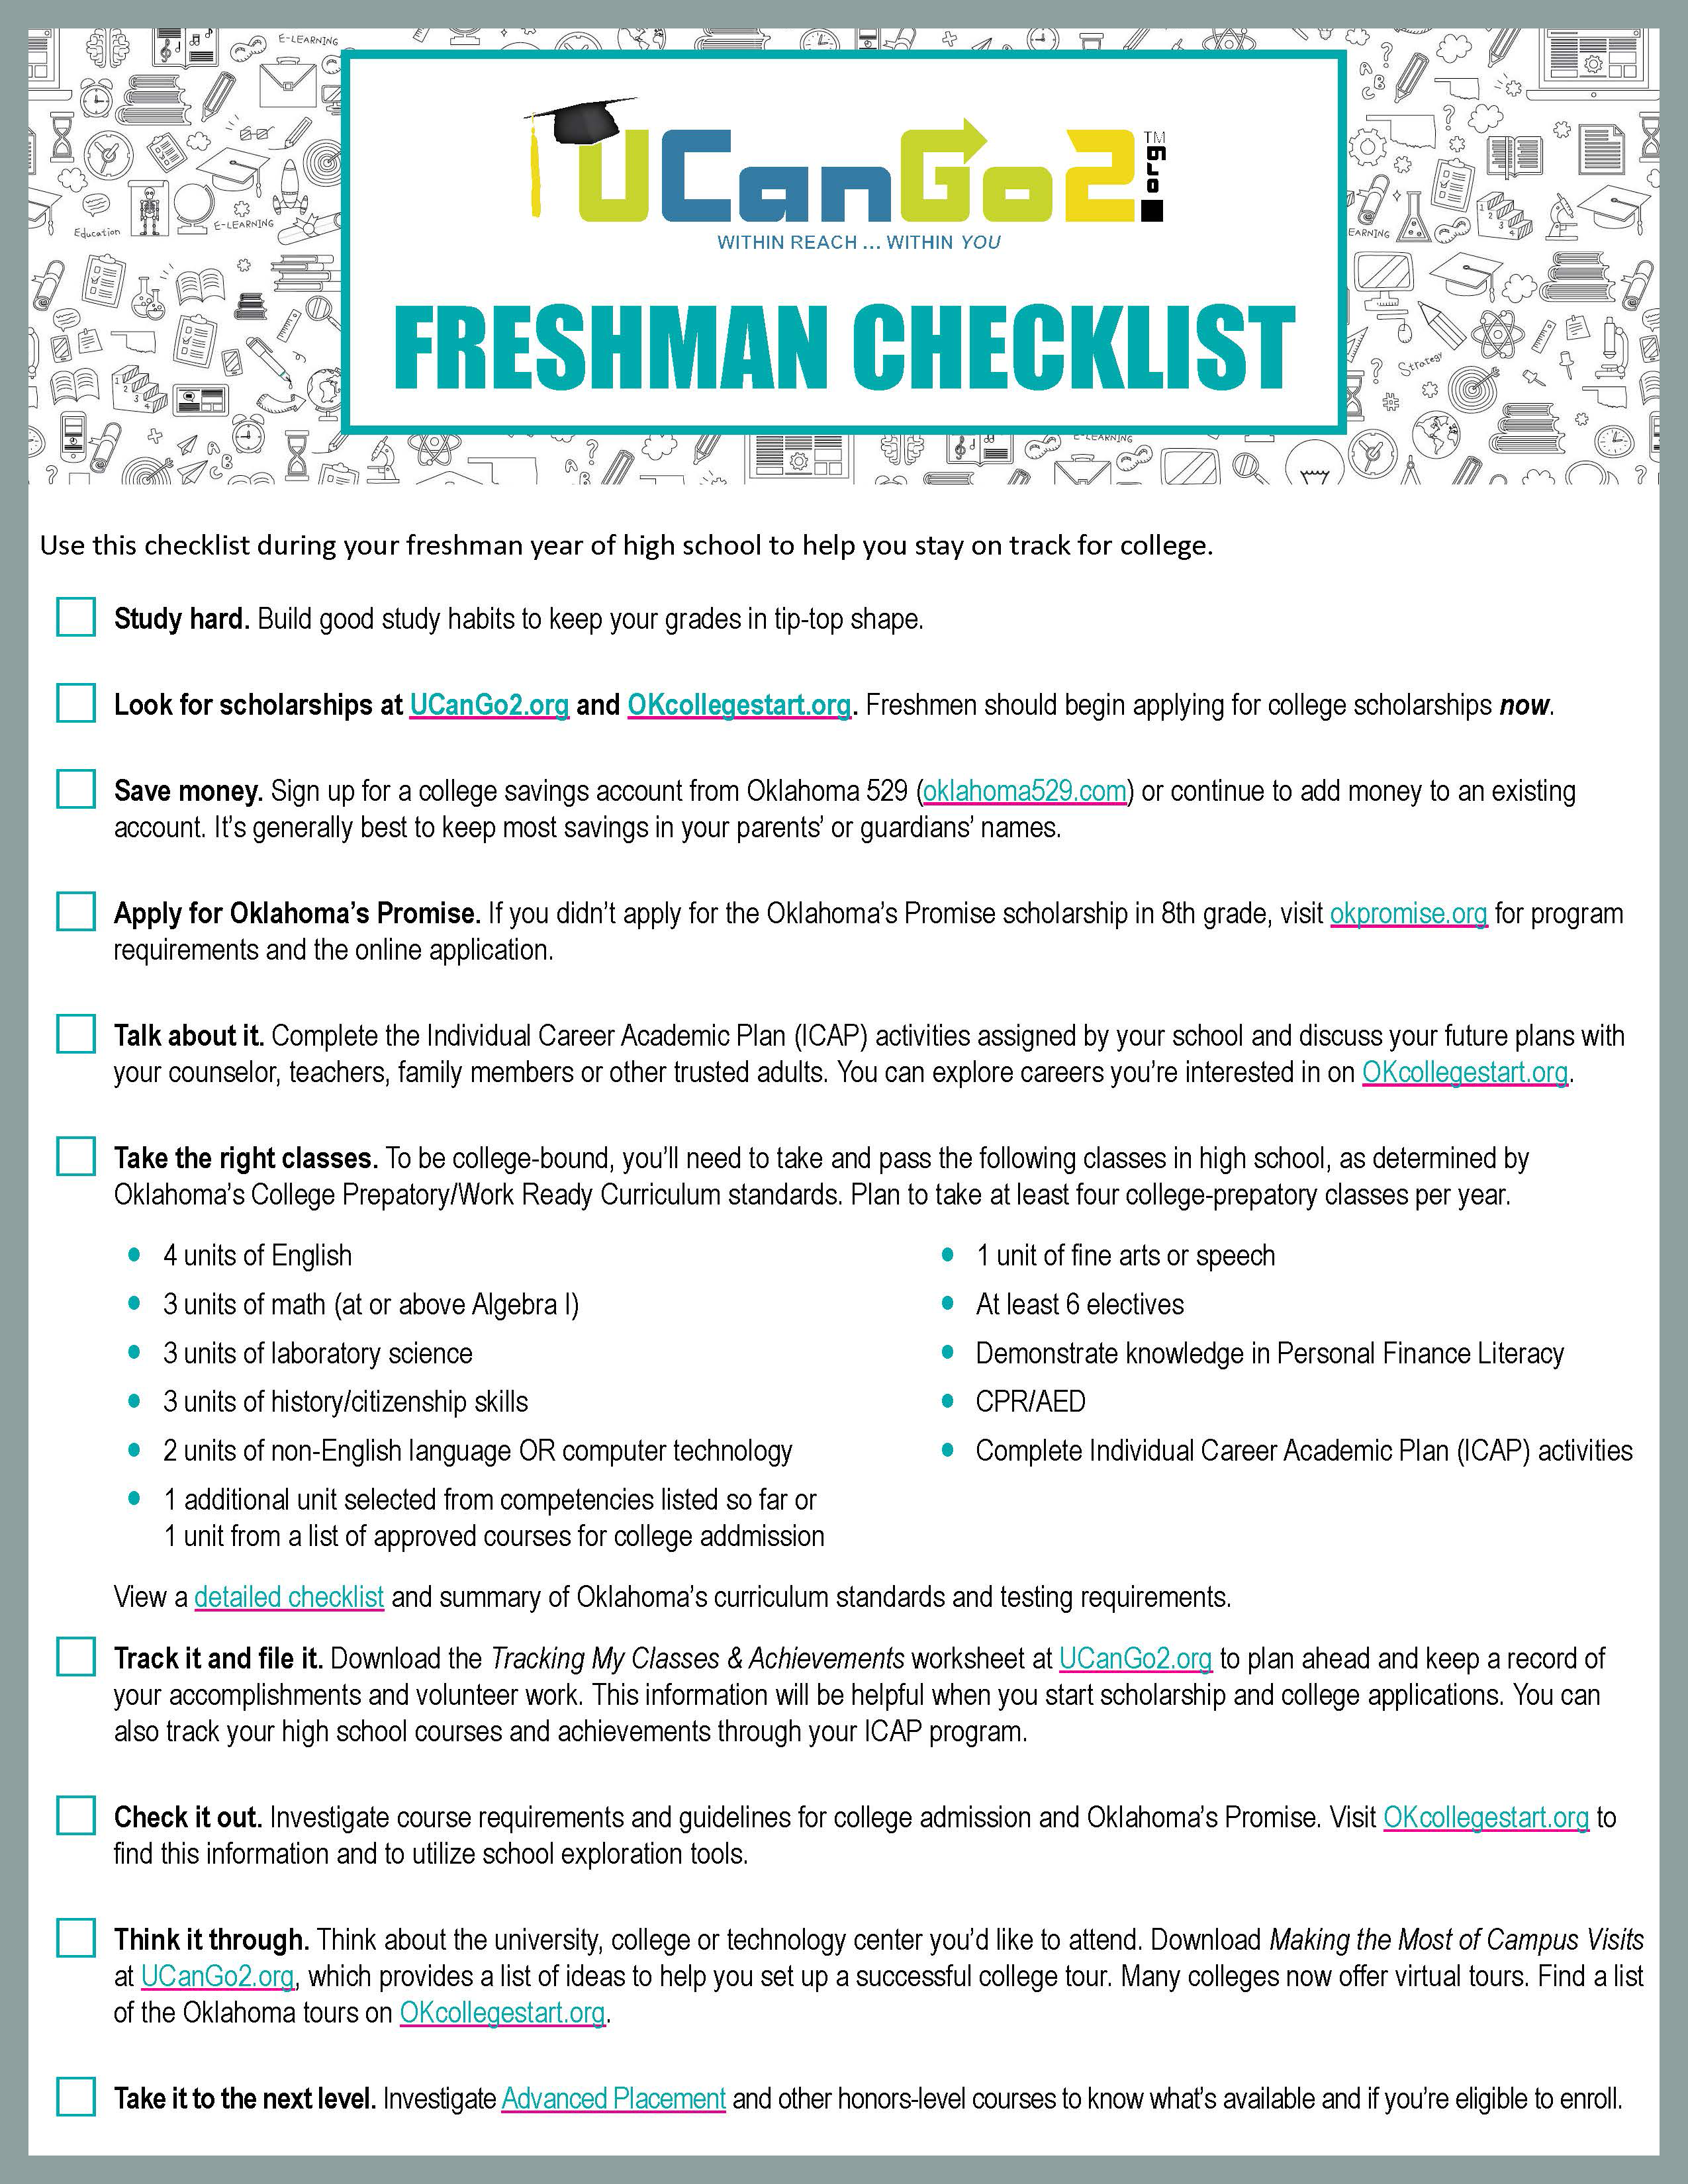 Links to college planning checklists for high school students